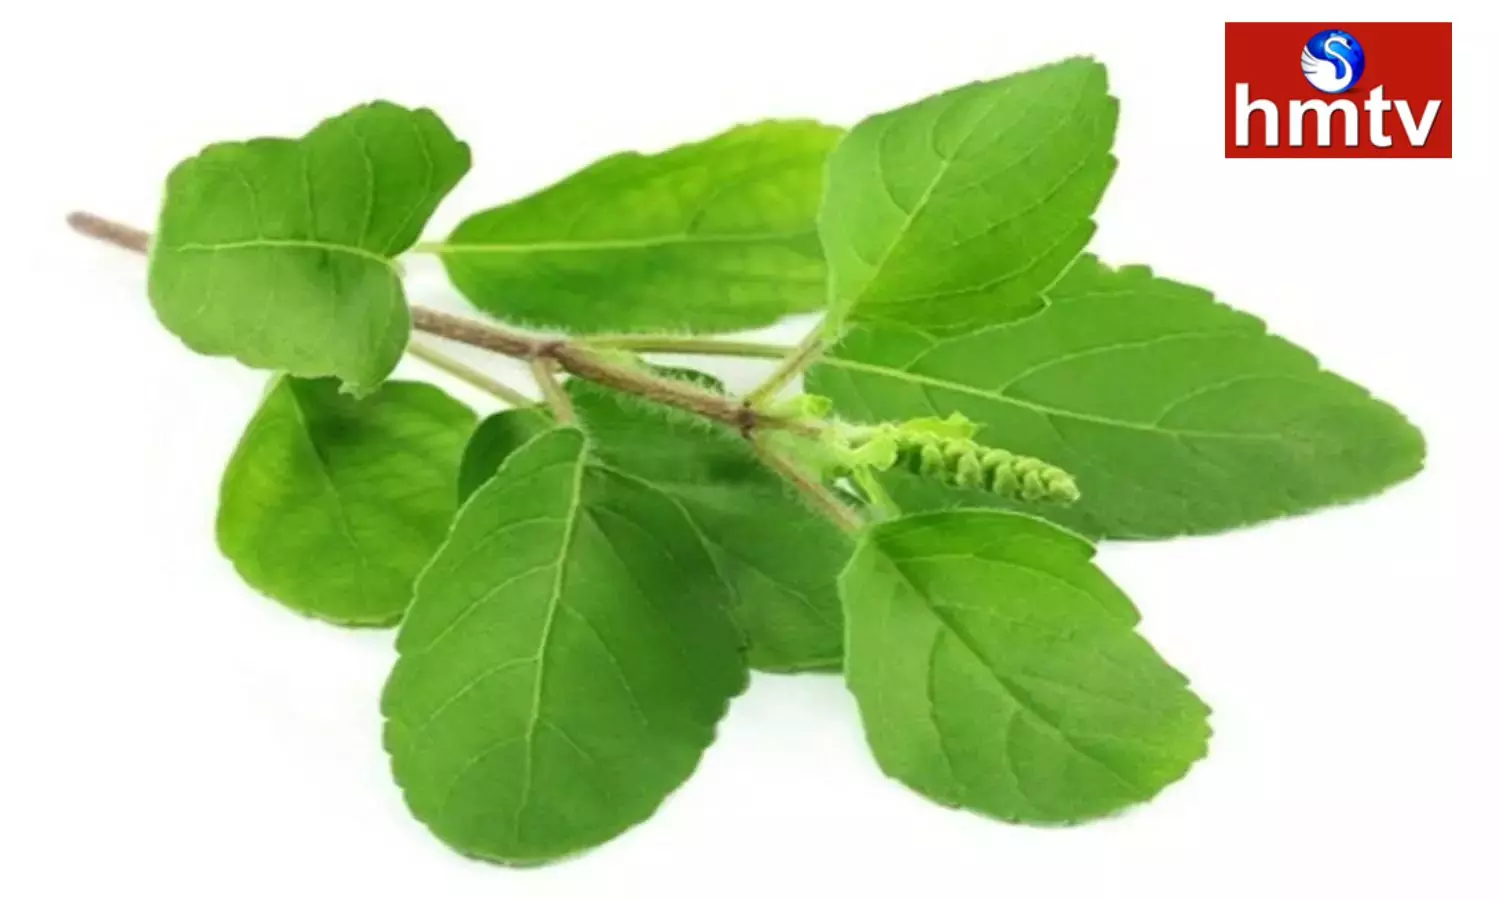 Chew four tulsi leaves daily on an empty stomach these diseases including diabetes will go away